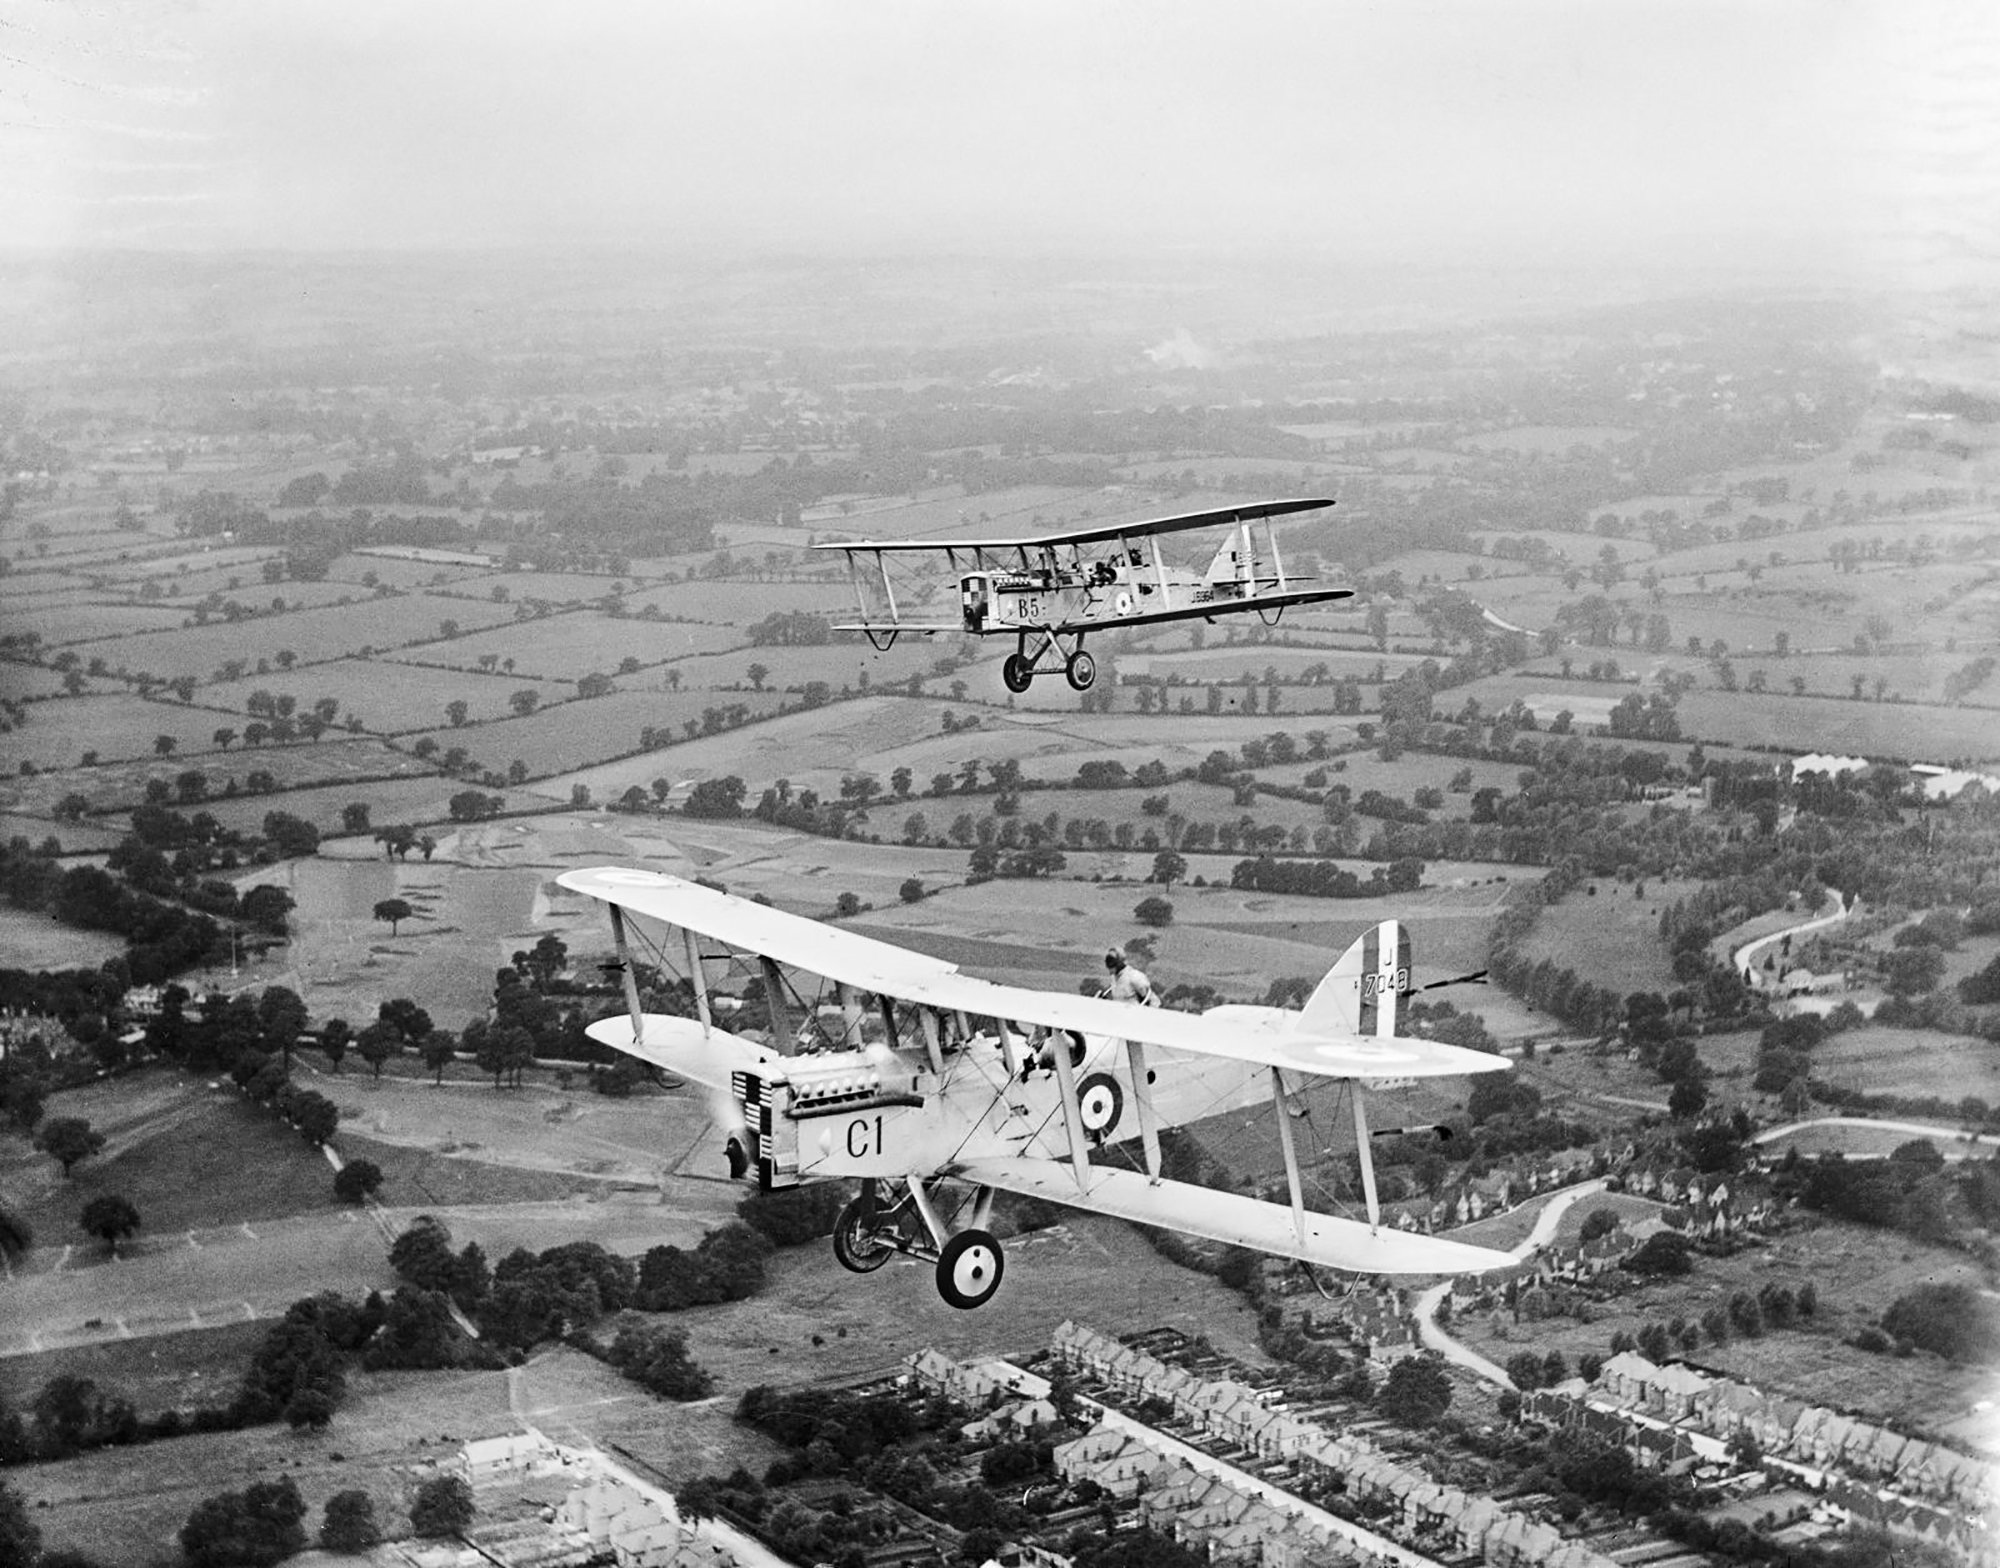 A DH9 biplane in flight at an RAF aerial pageant in 1924.